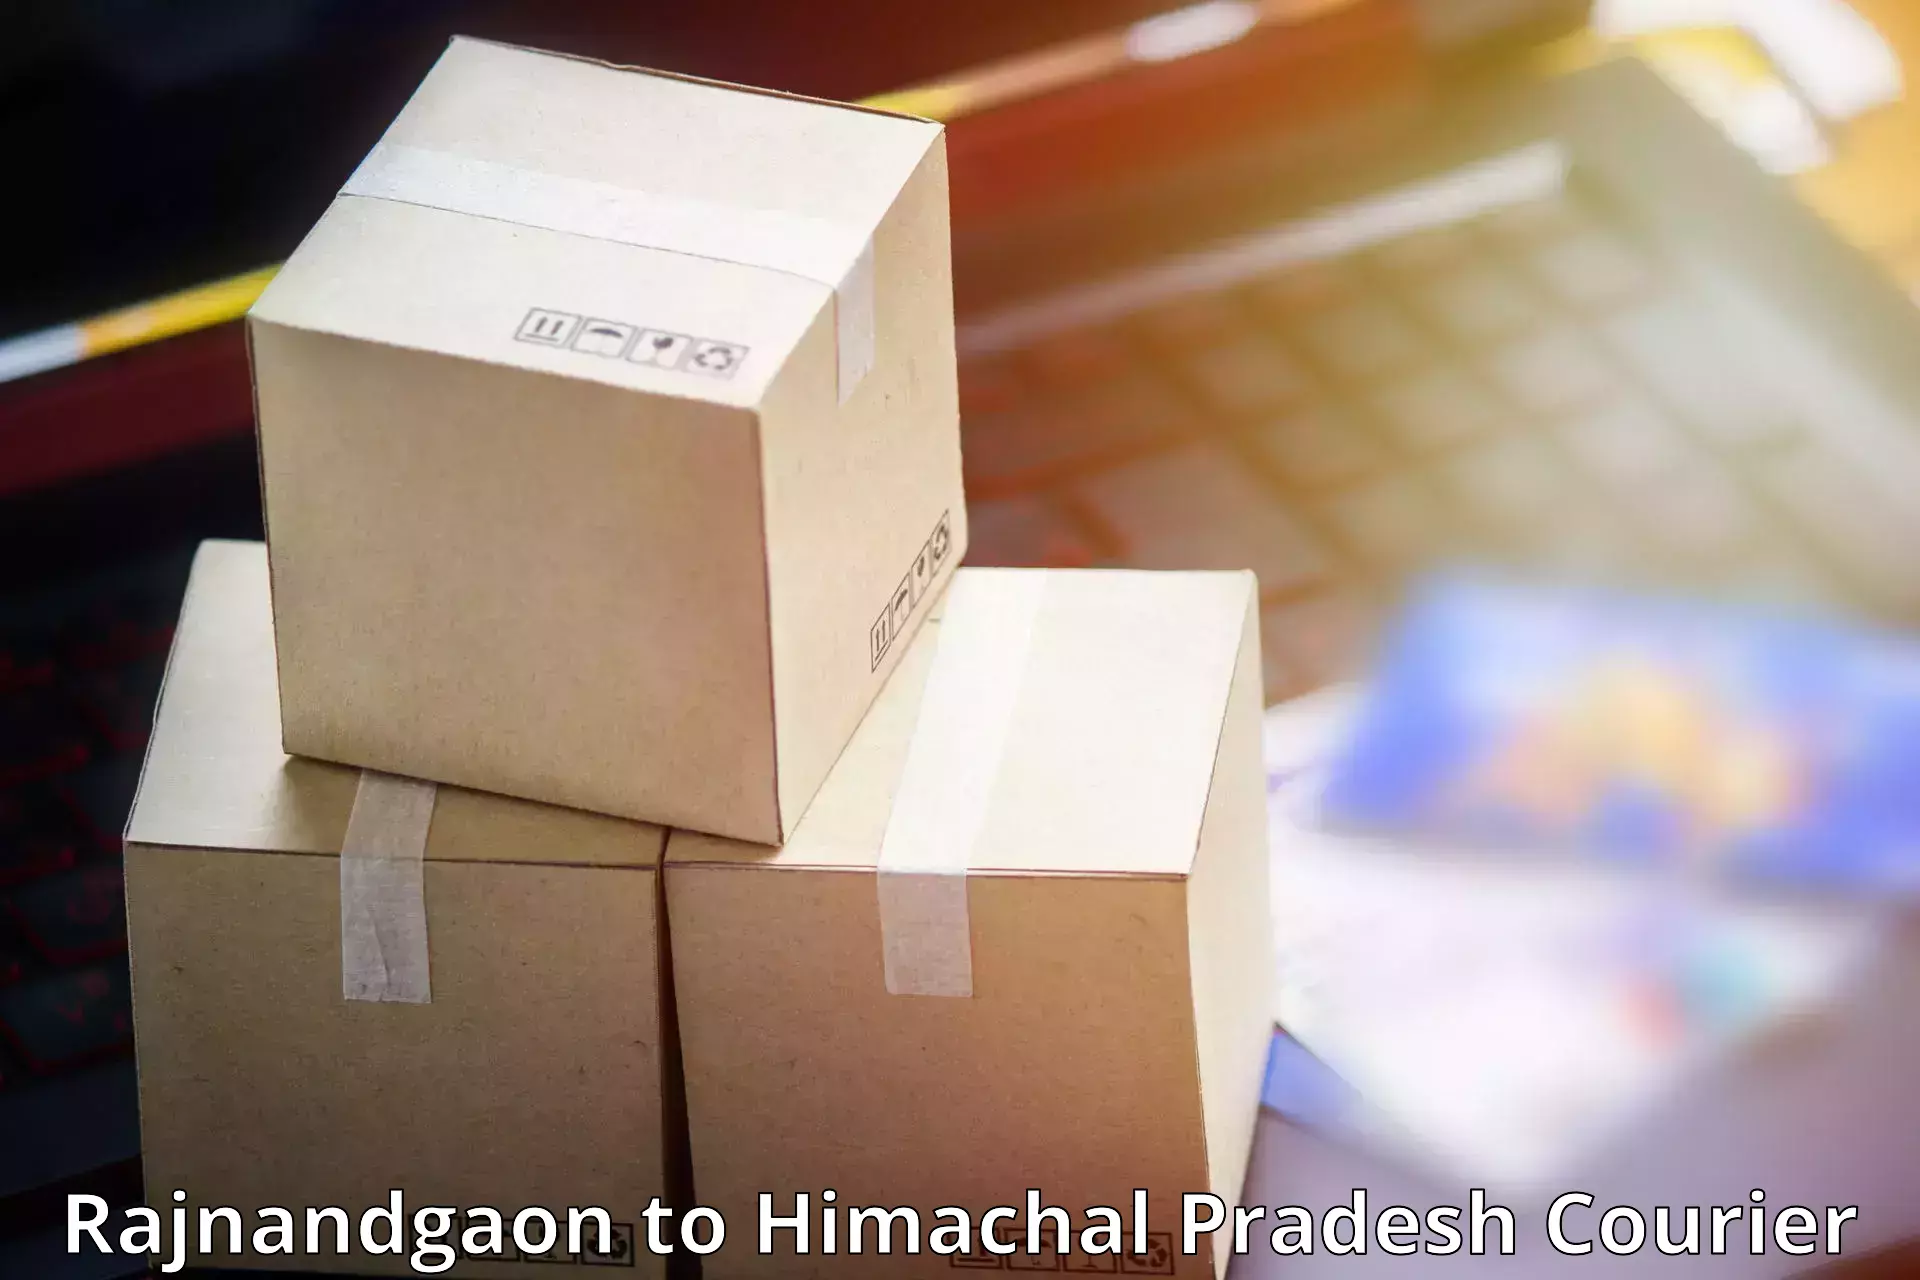 State-of-the-art courier technology Rajnandgaon to Jassur